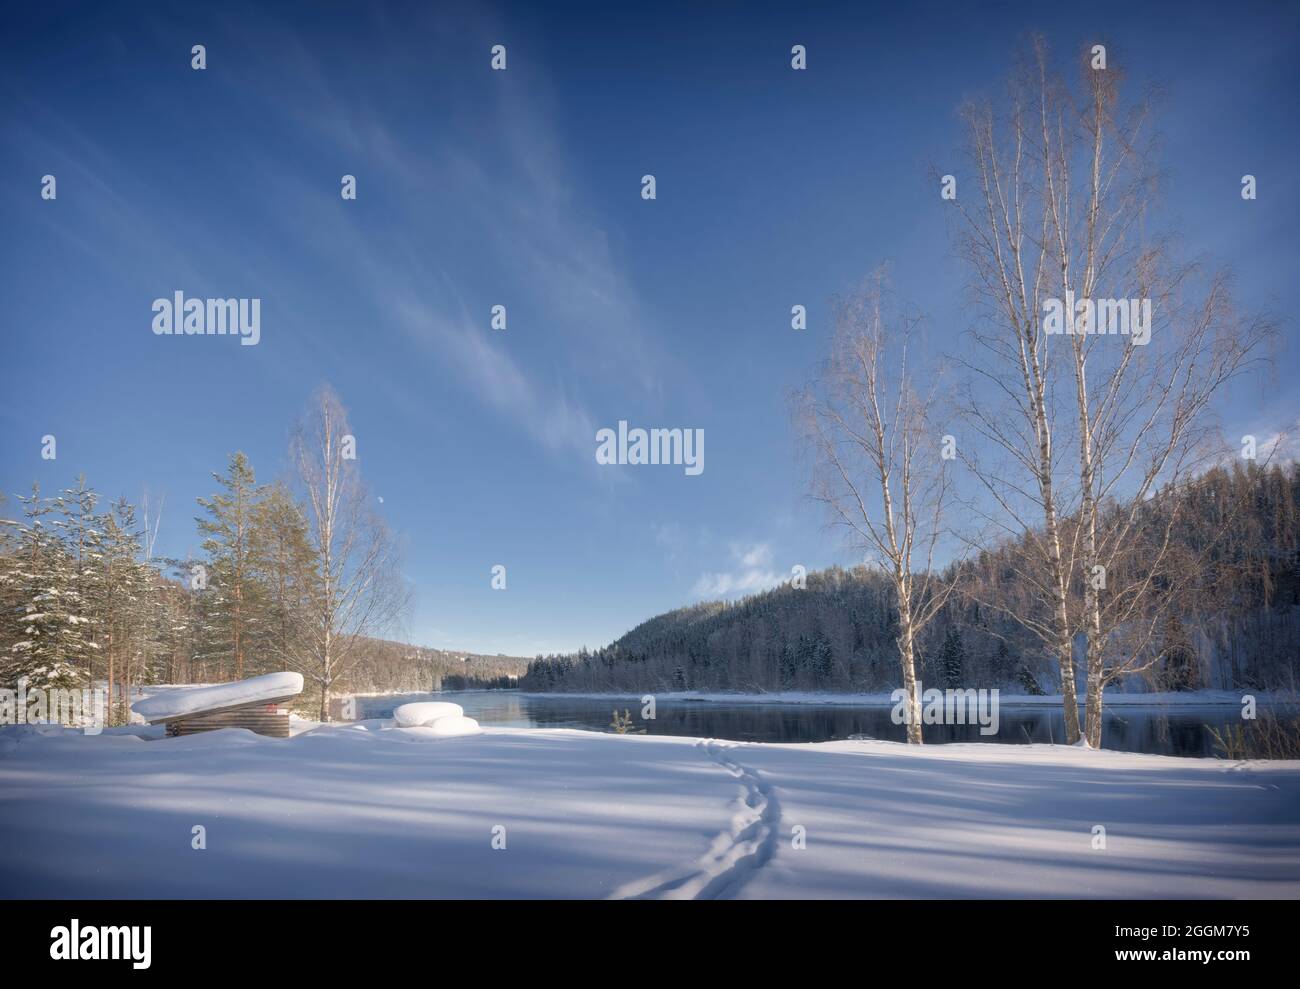 swedish winter landscape with moose tracks towards a river Stock Photo